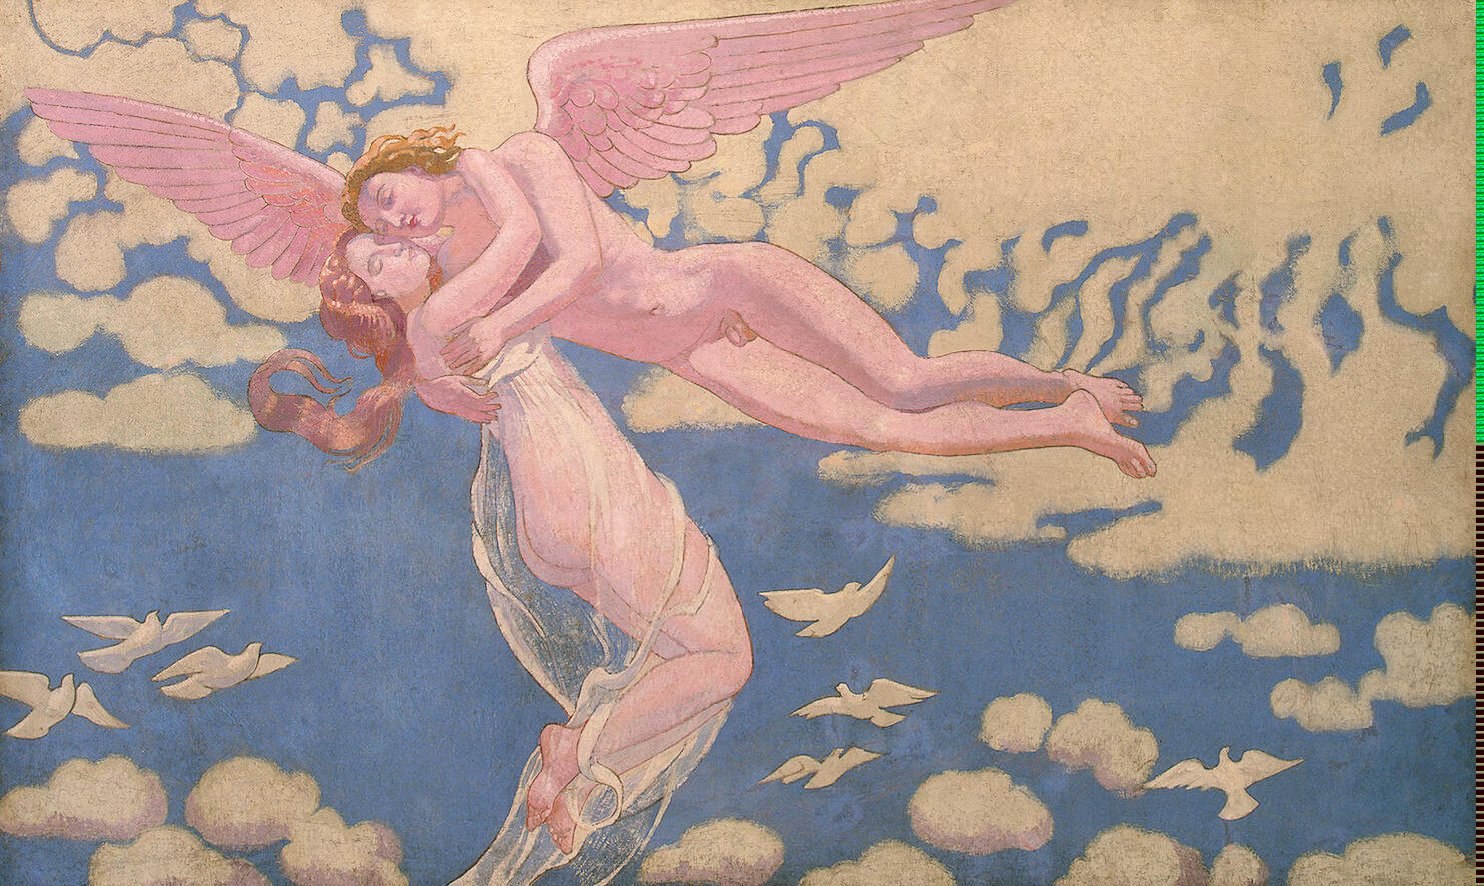 Maurice Denis - Amor tragt Psyche in den Himmel - Cupid Carrying Psyche Up to Heaven